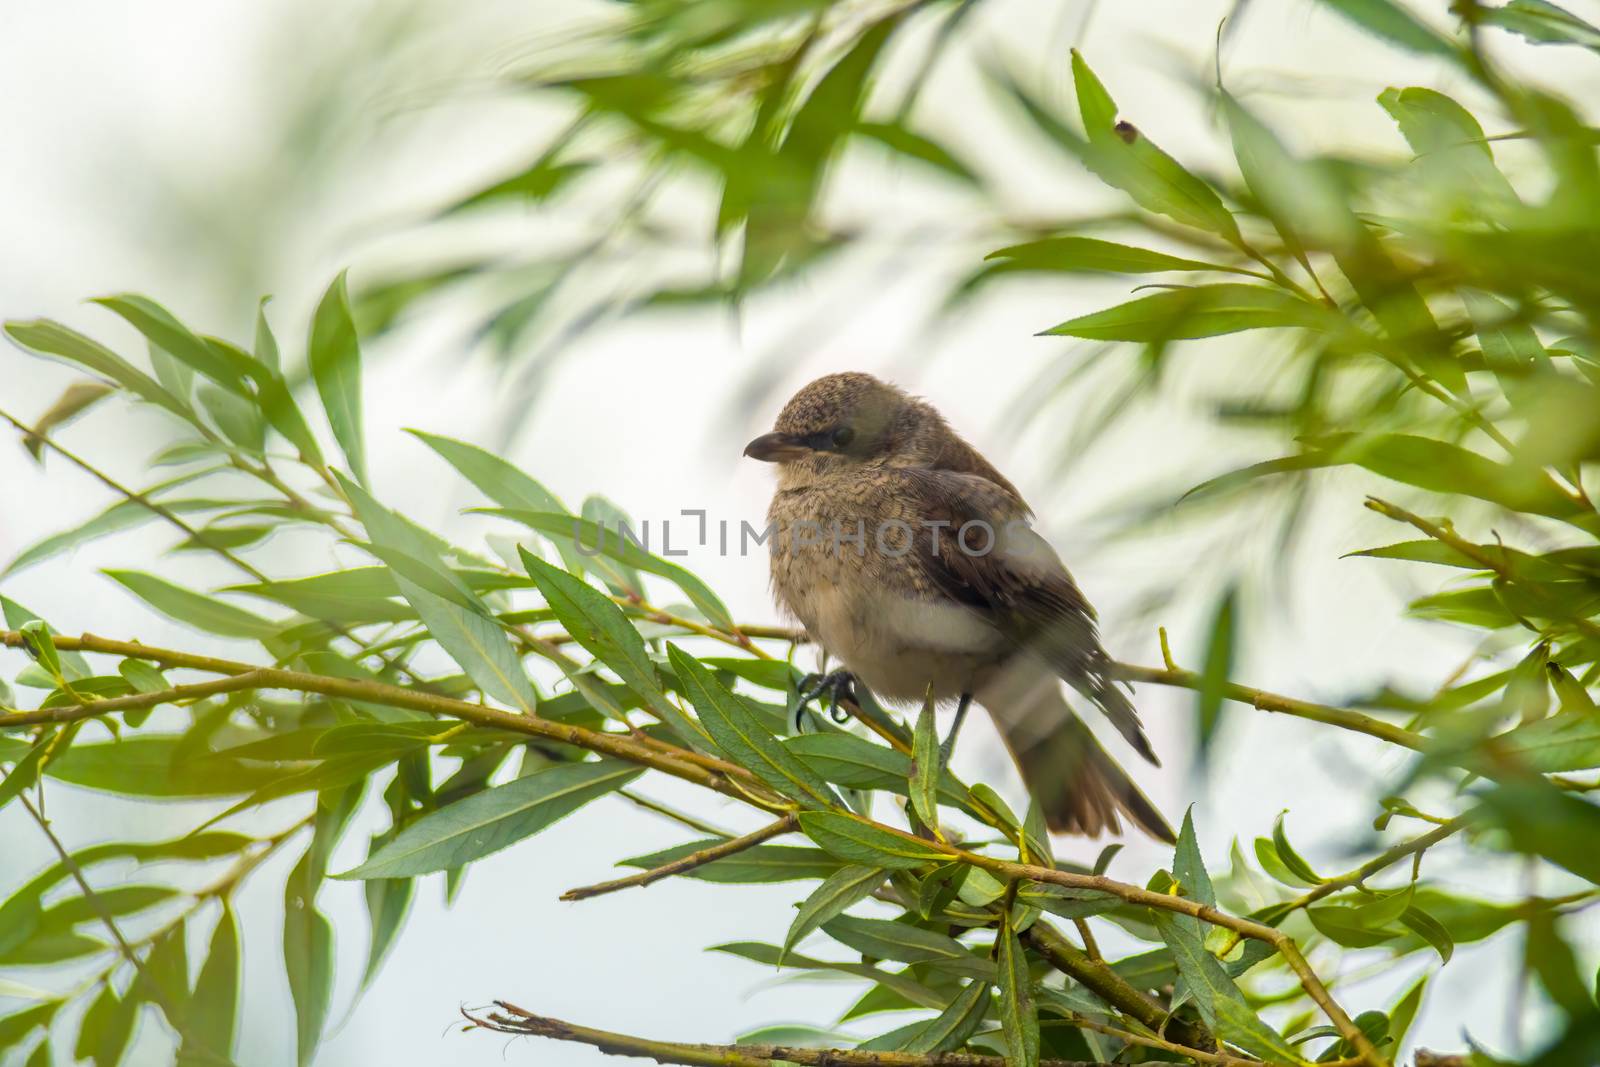 a little young bird on a branch in nature by mario_plechaty_photography